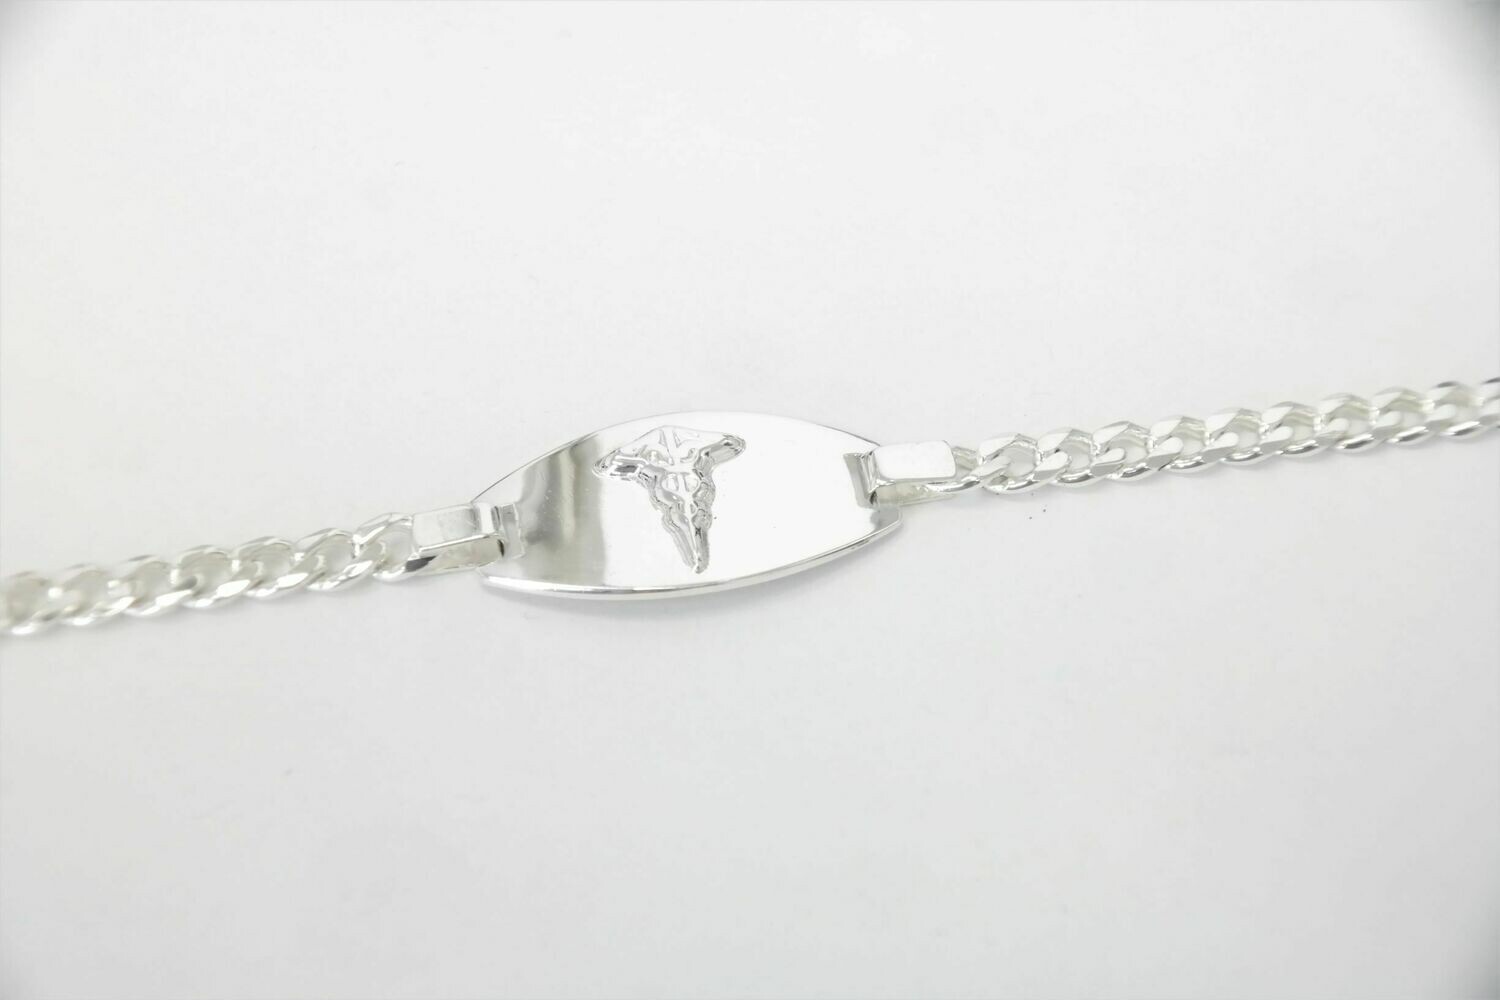 Personalized high-quality 925 sterling silver medical bracelet made in Italy